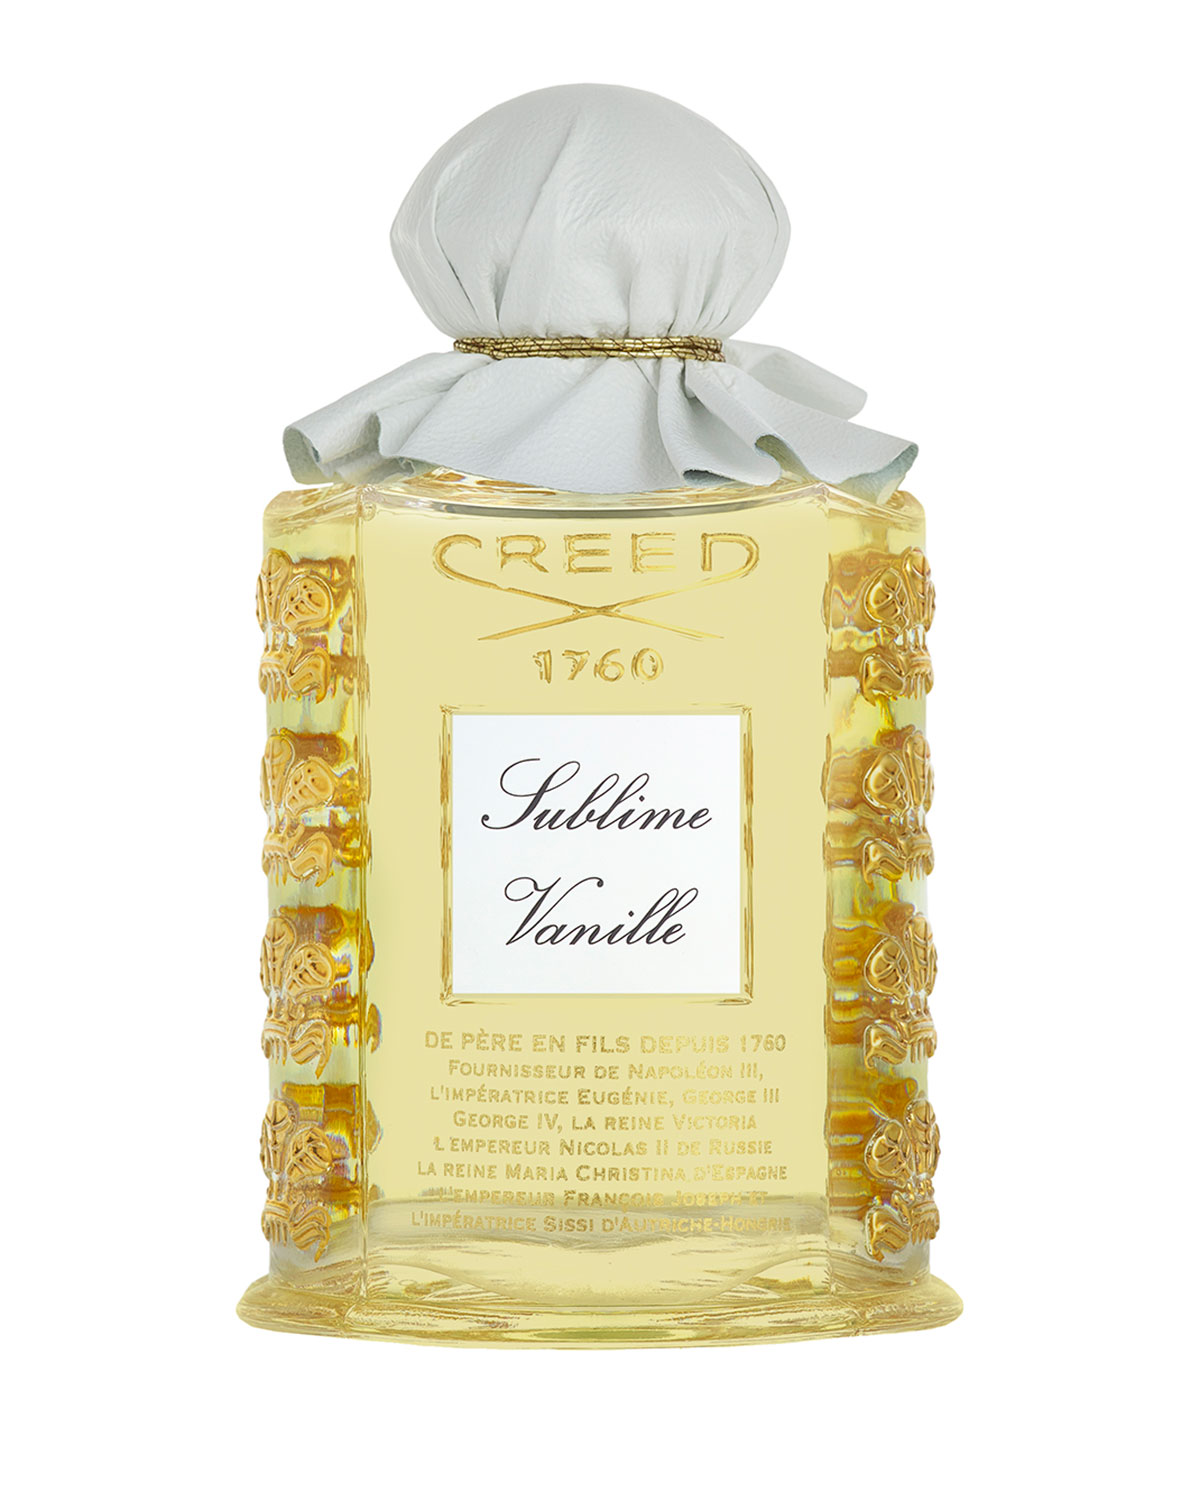 CREED SUBLIME VANILLE